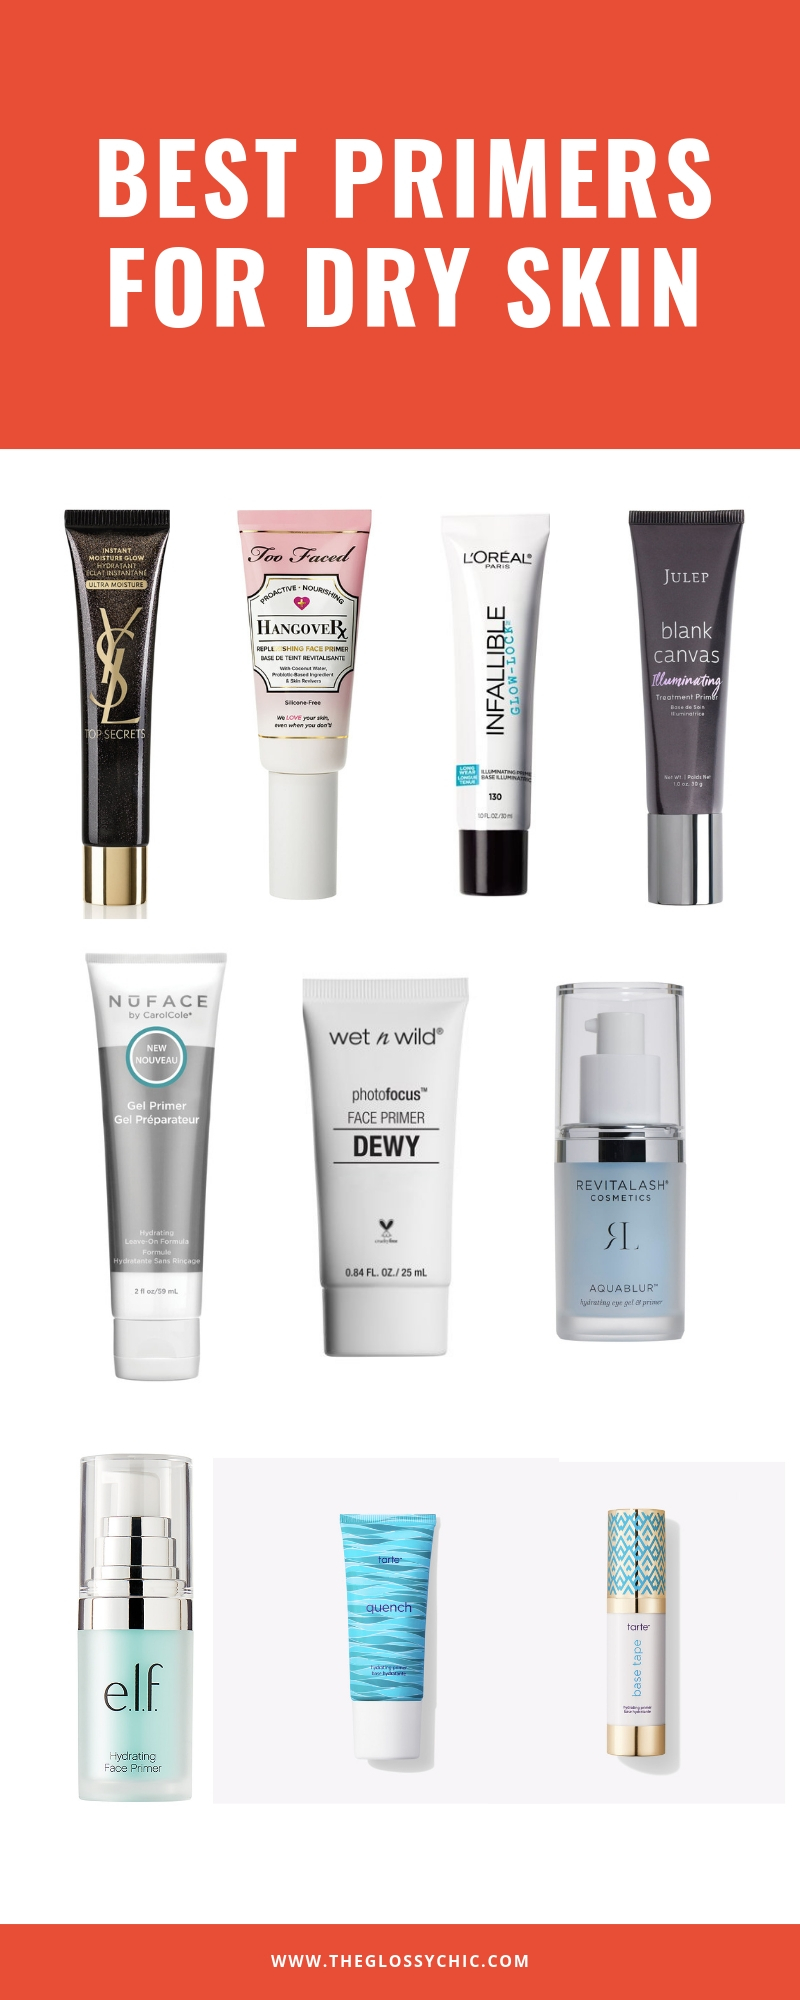 best primers for dry skin